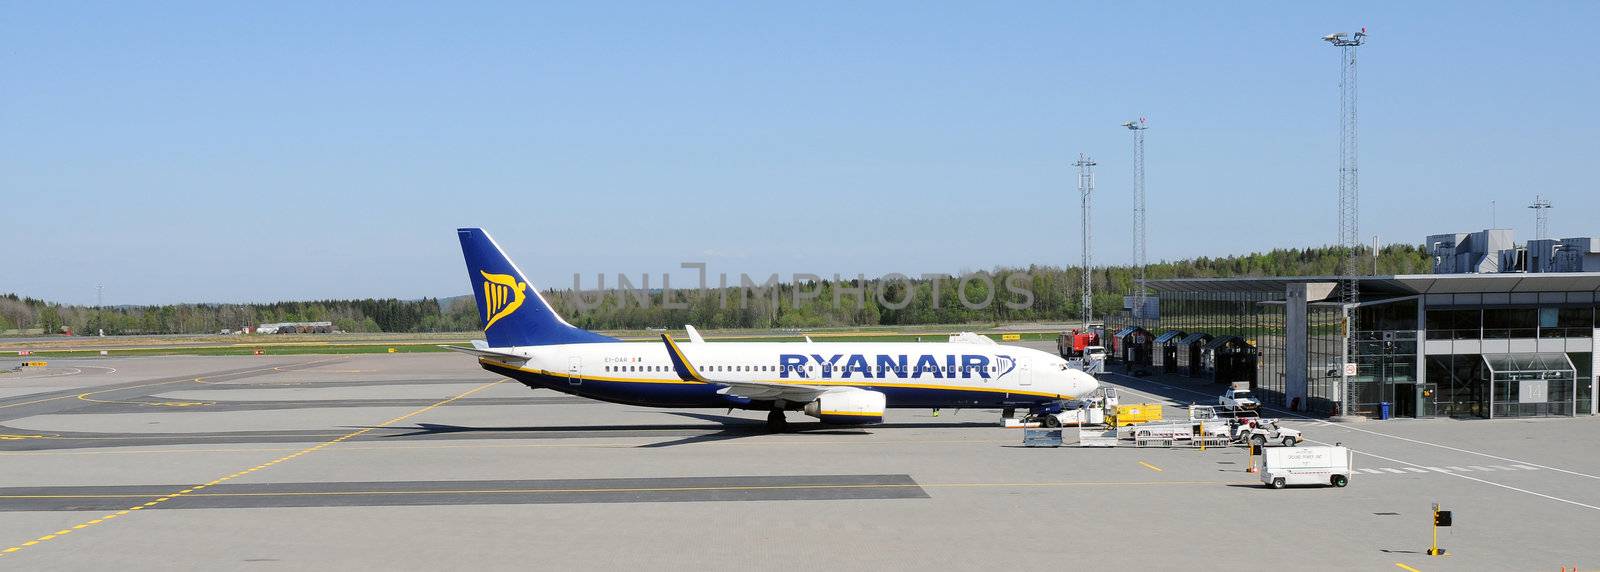 Airliner from Ryanair at Torp airport Norway